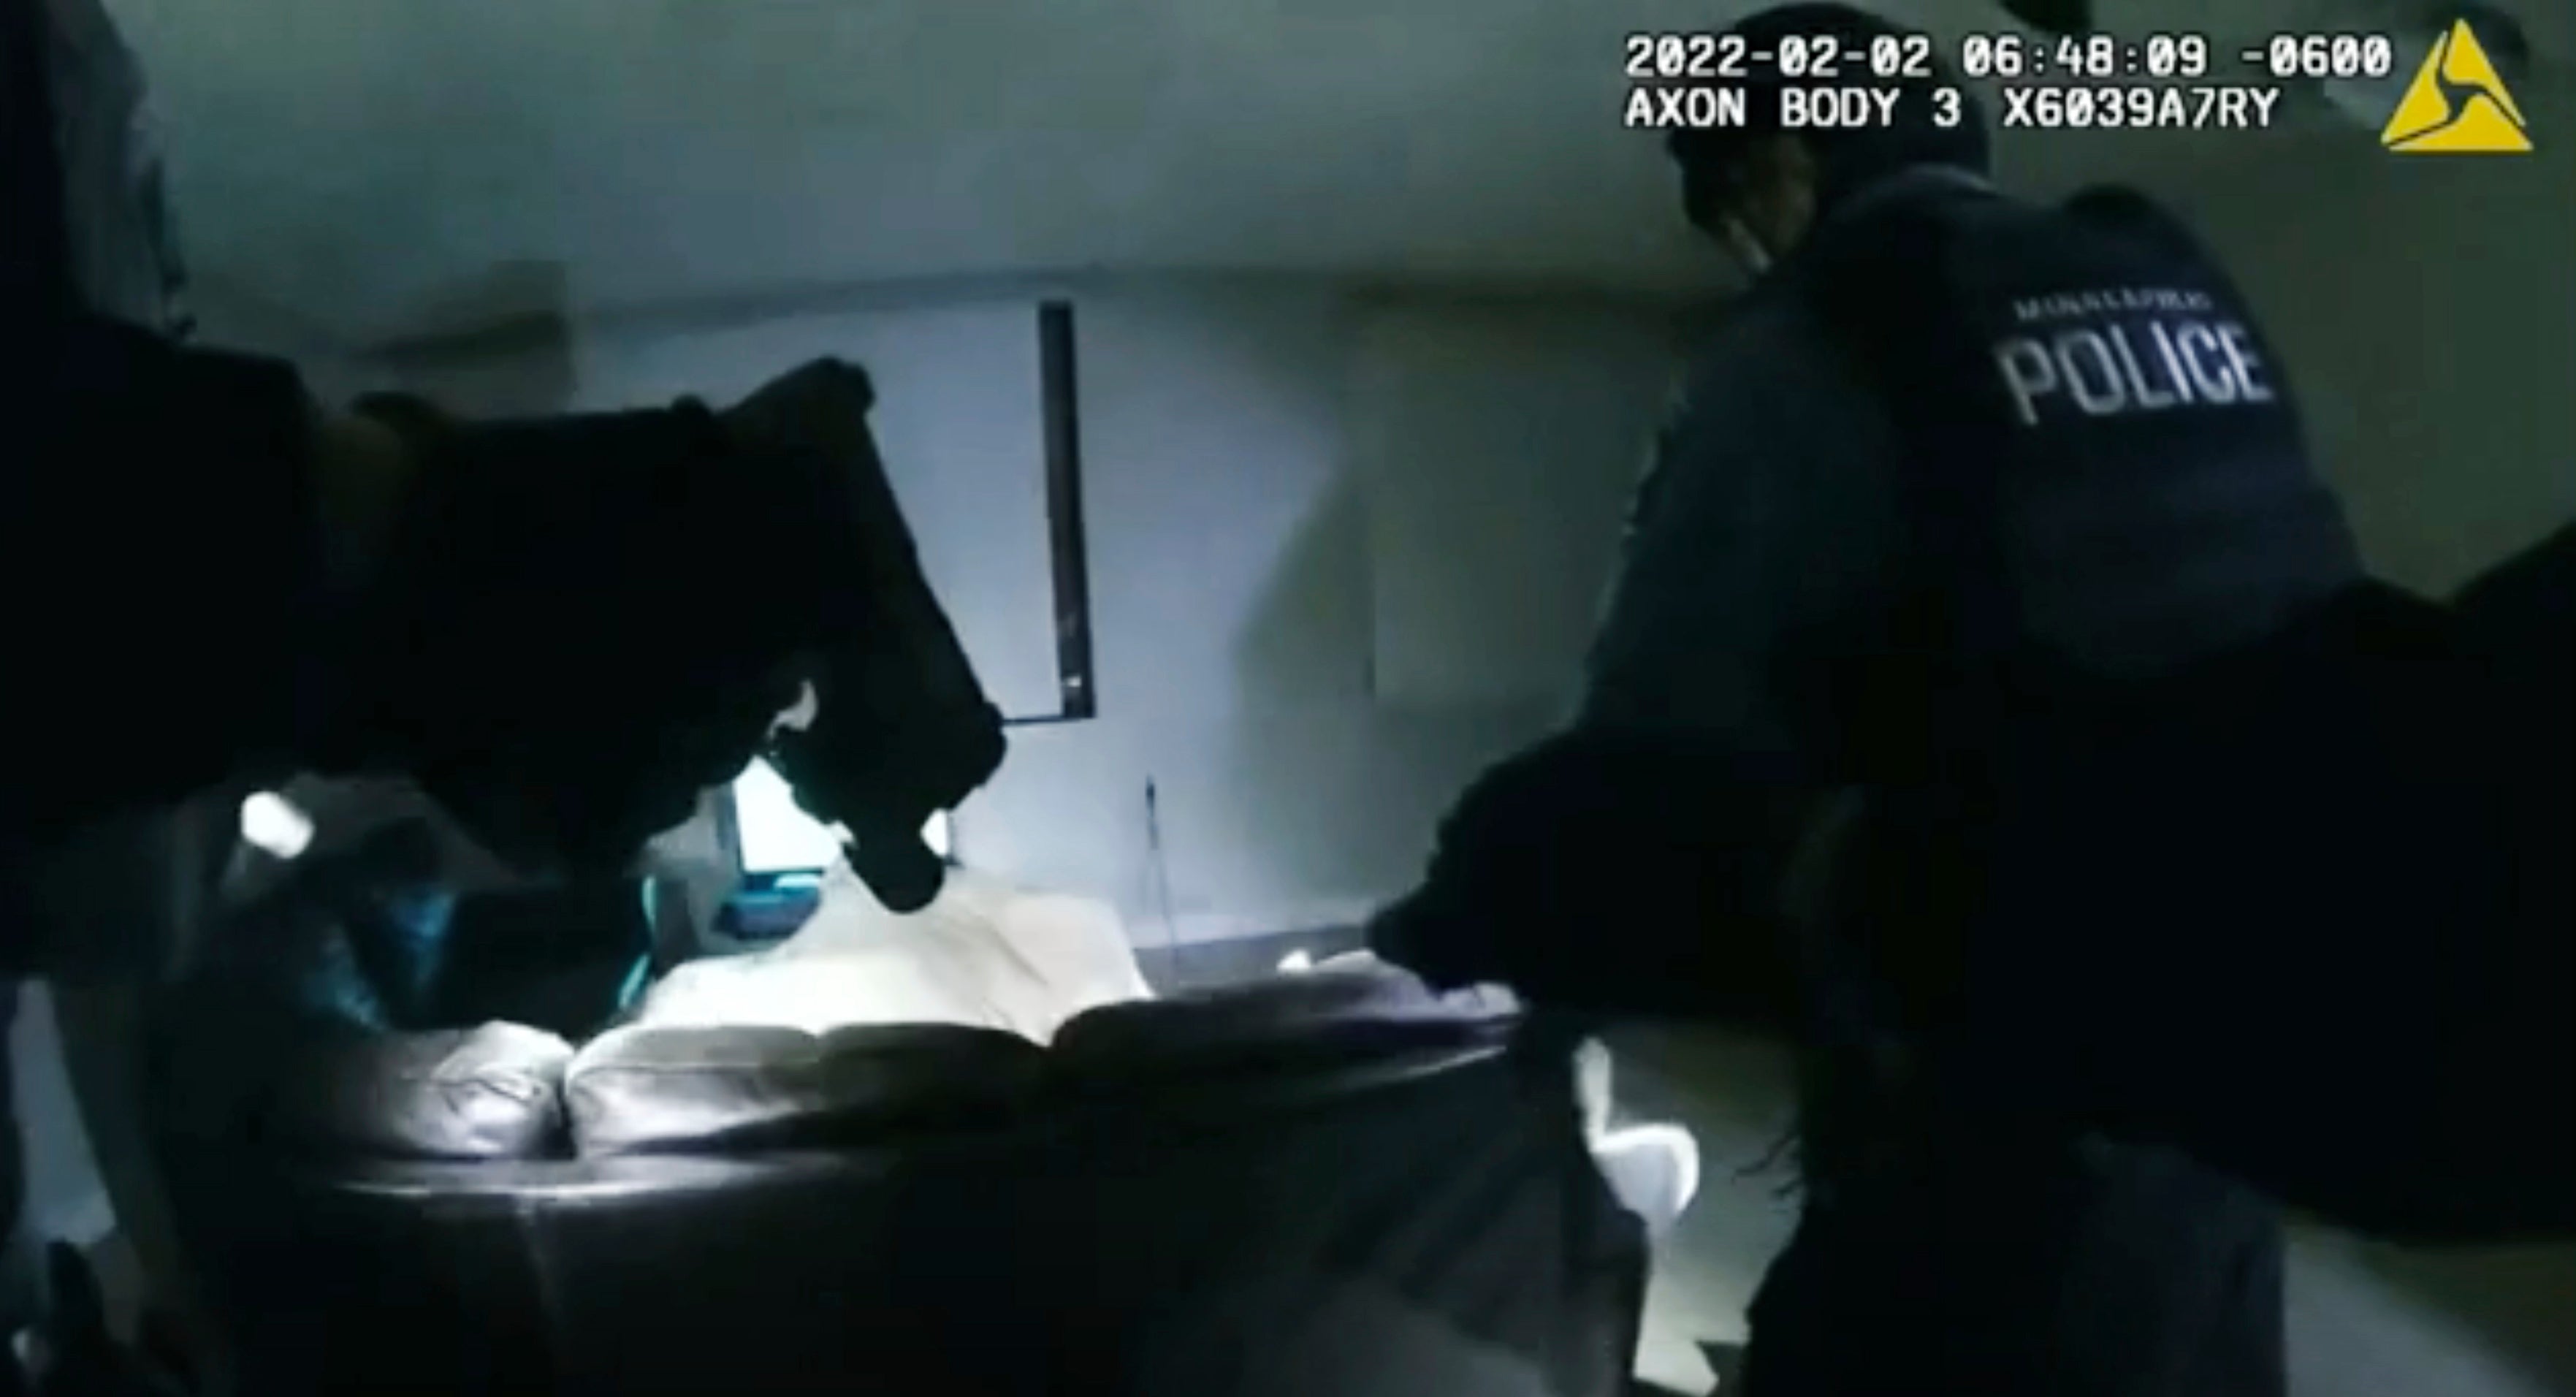 This image taken from Minneapolis Police Department body camera video shows officers entering the apartment of 22-year-old Amir Locke on 2 February 2022